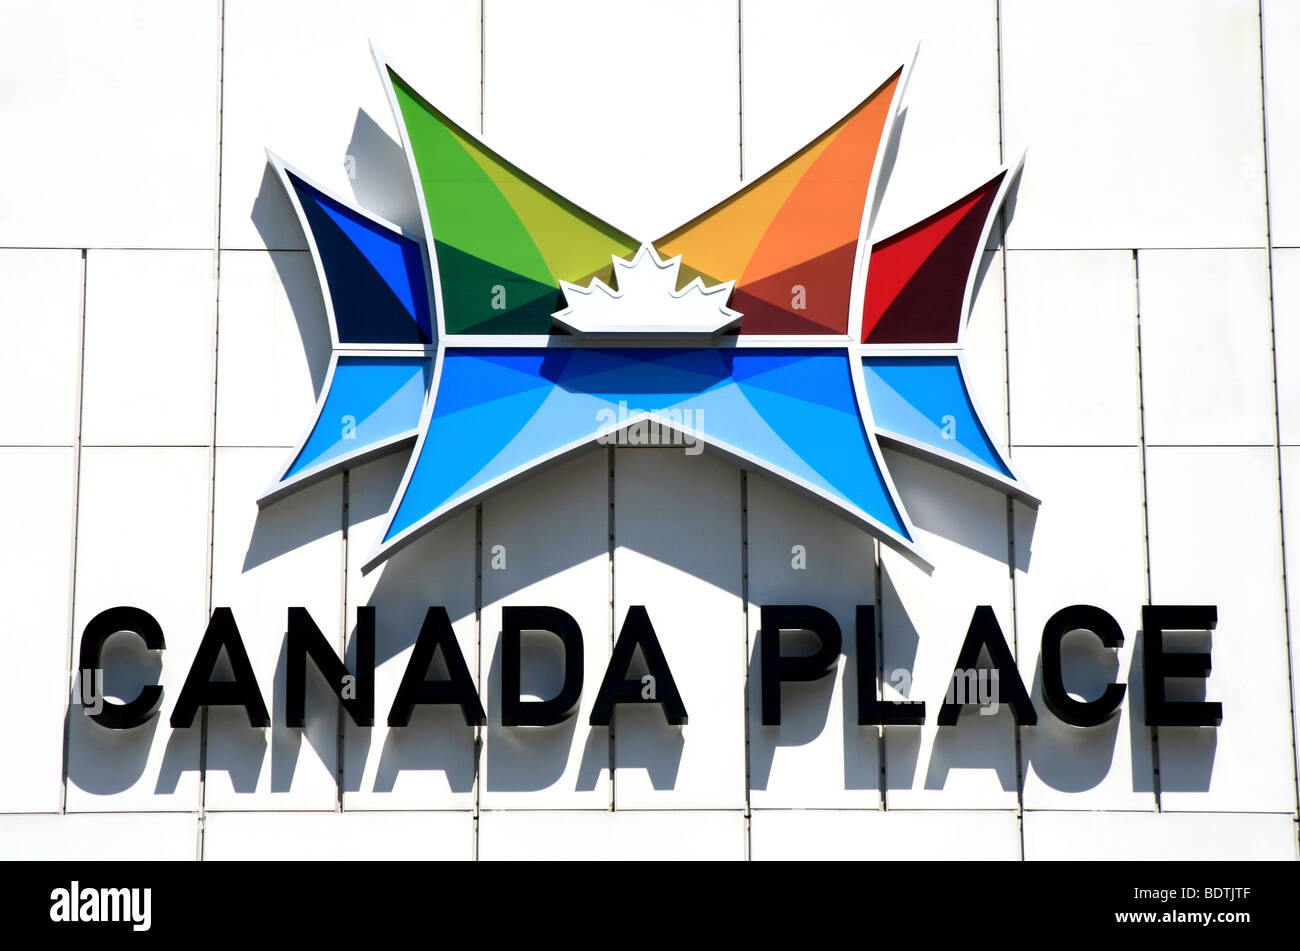 Canada Place sign, Vancouver, BC - Canada Stock Photo